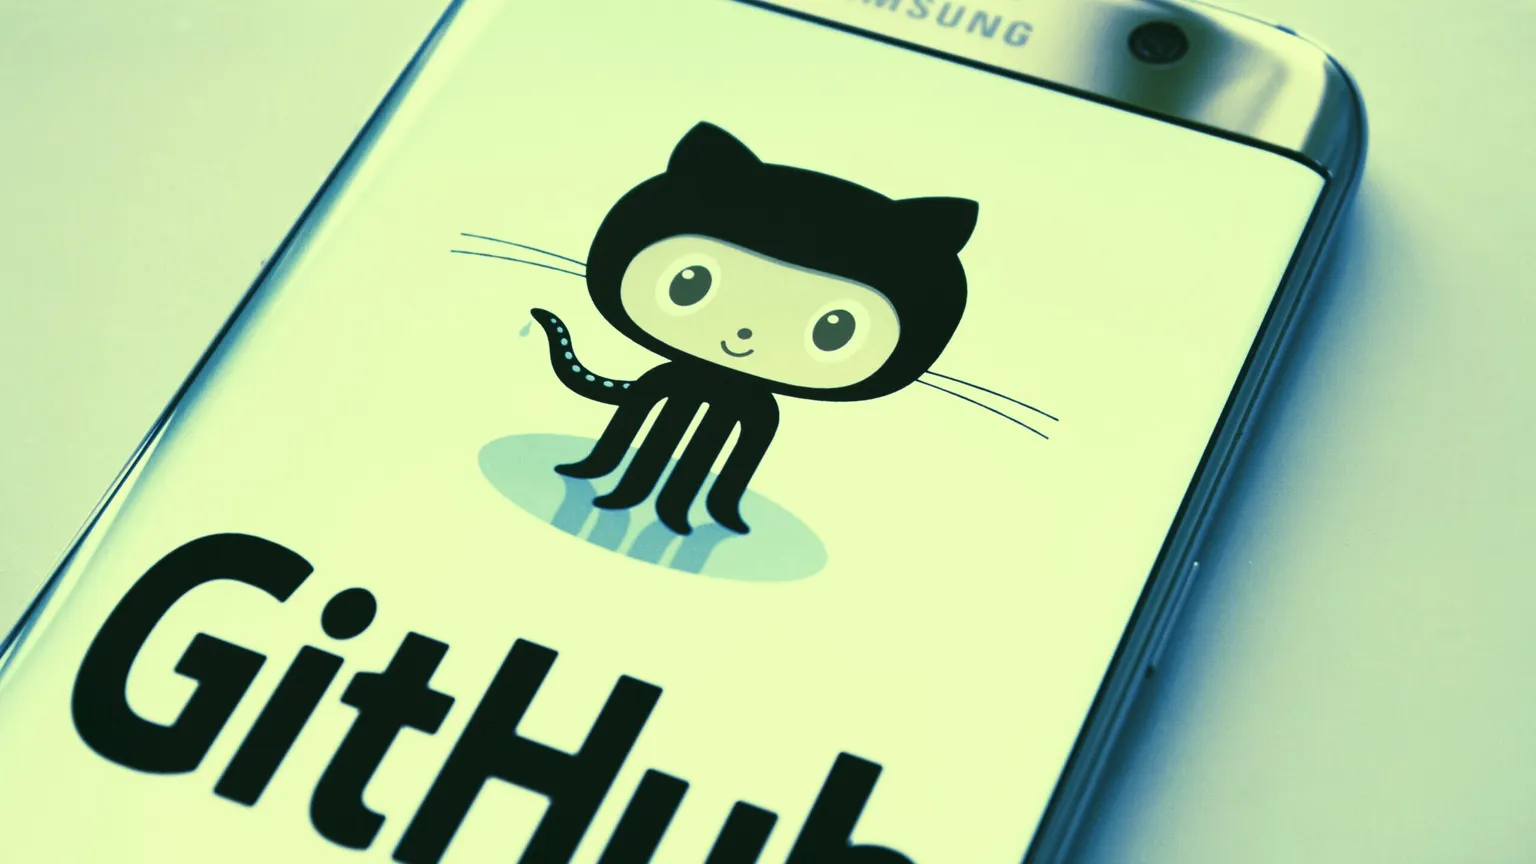 GitHub is the latest tech firm to make changes to become more racially inclusive. Image: Shiutterstock